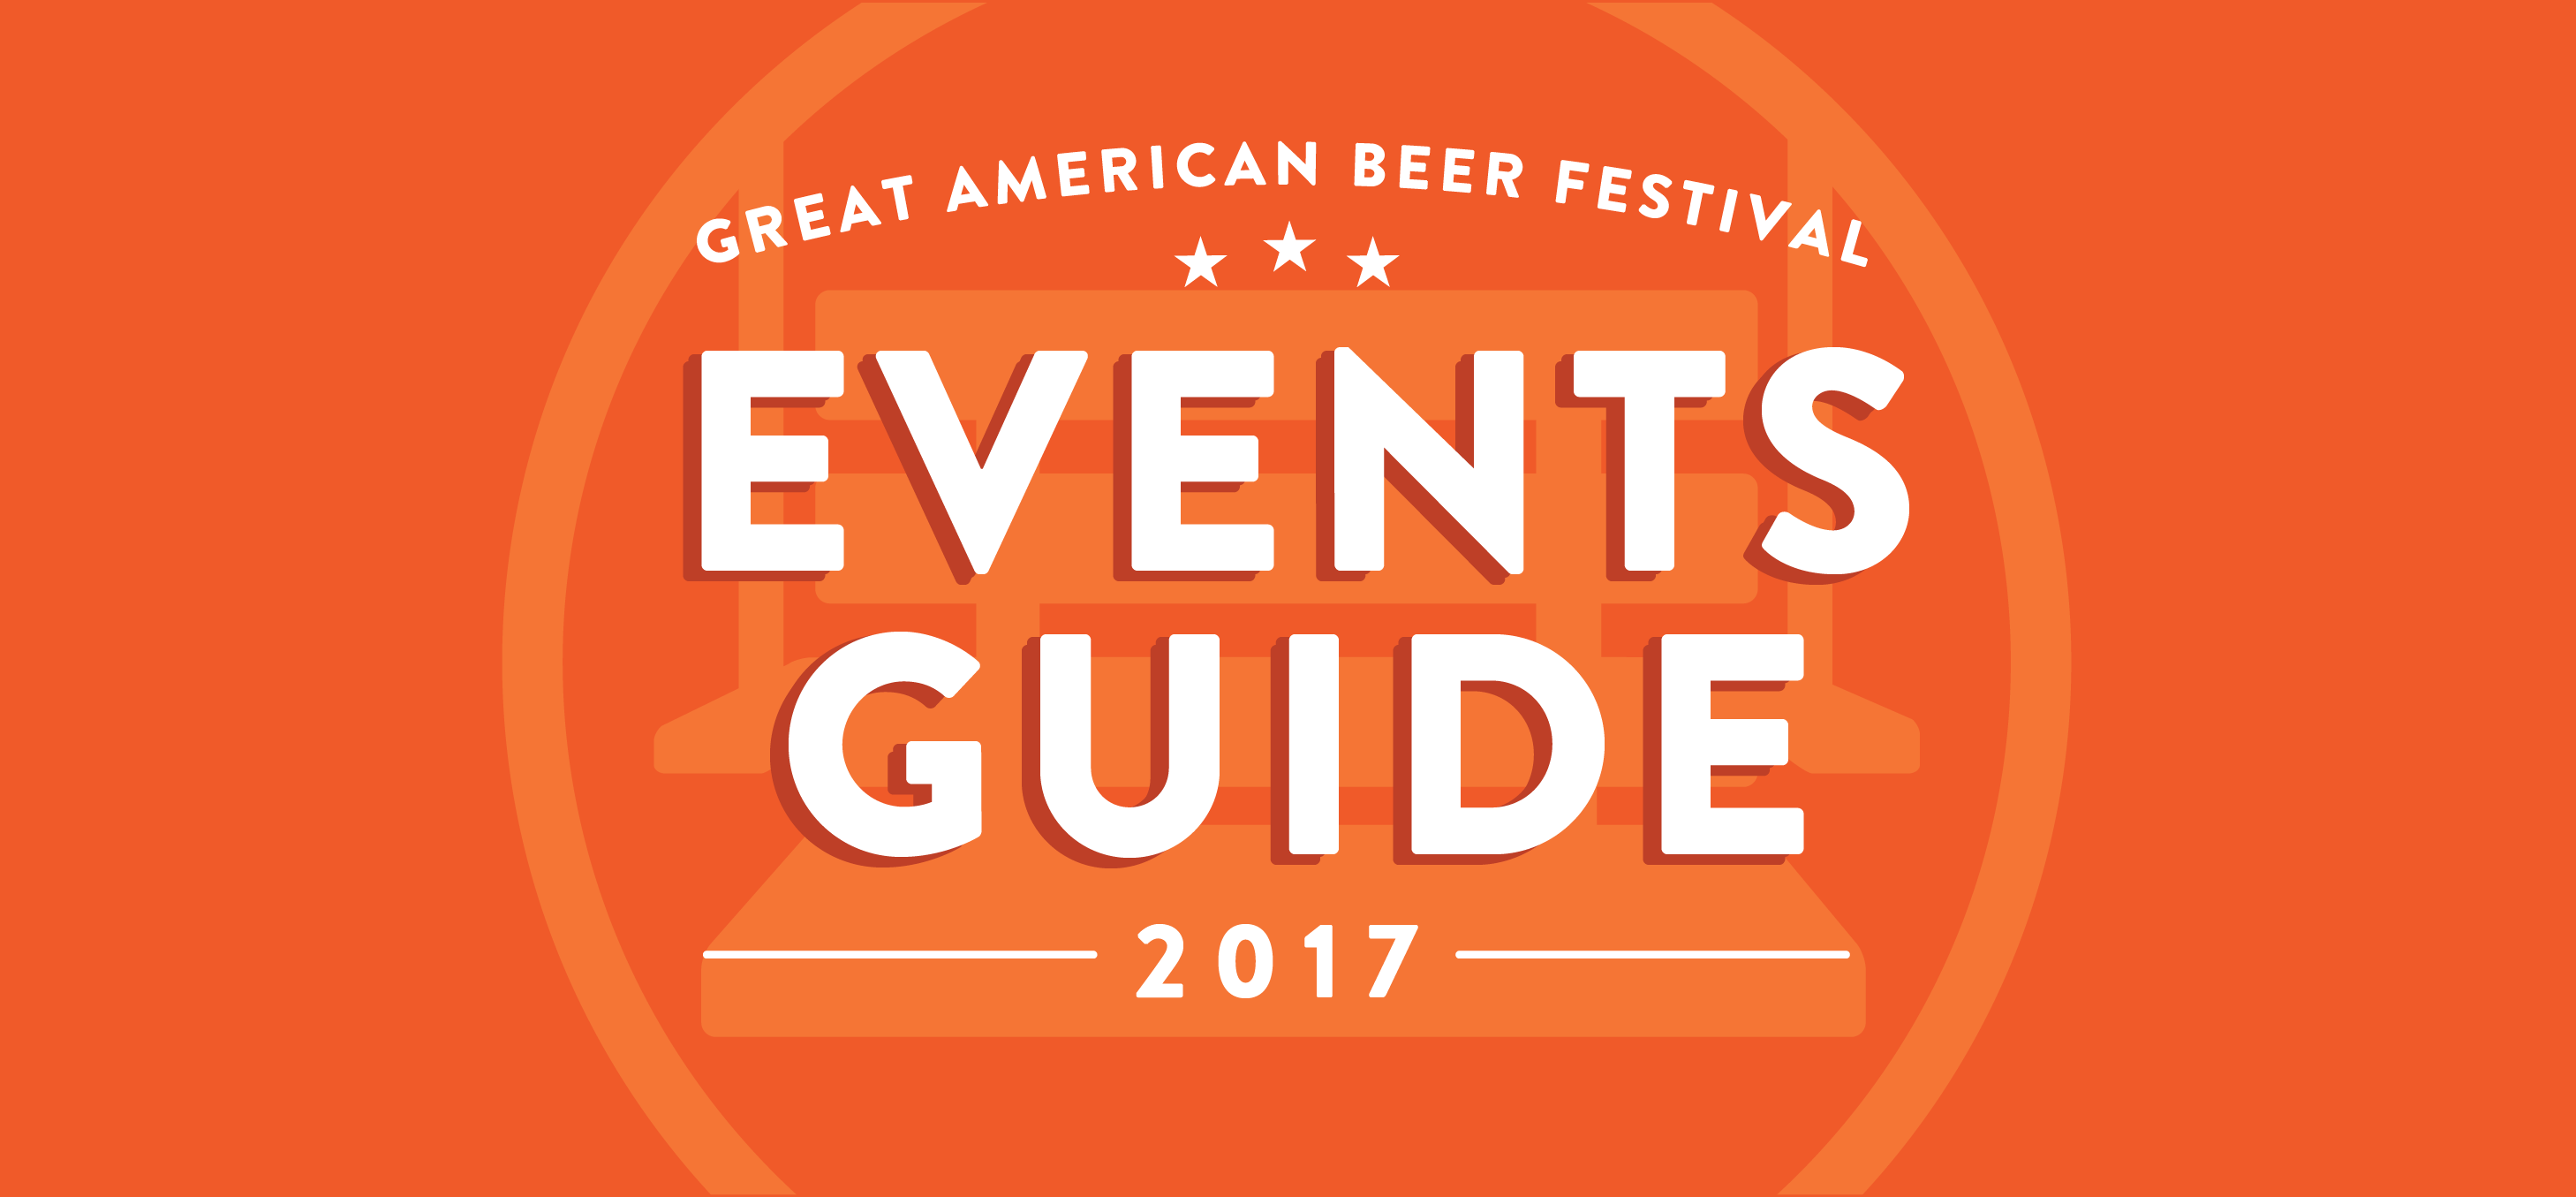 Can’t-Miss Colorado Events During GABF